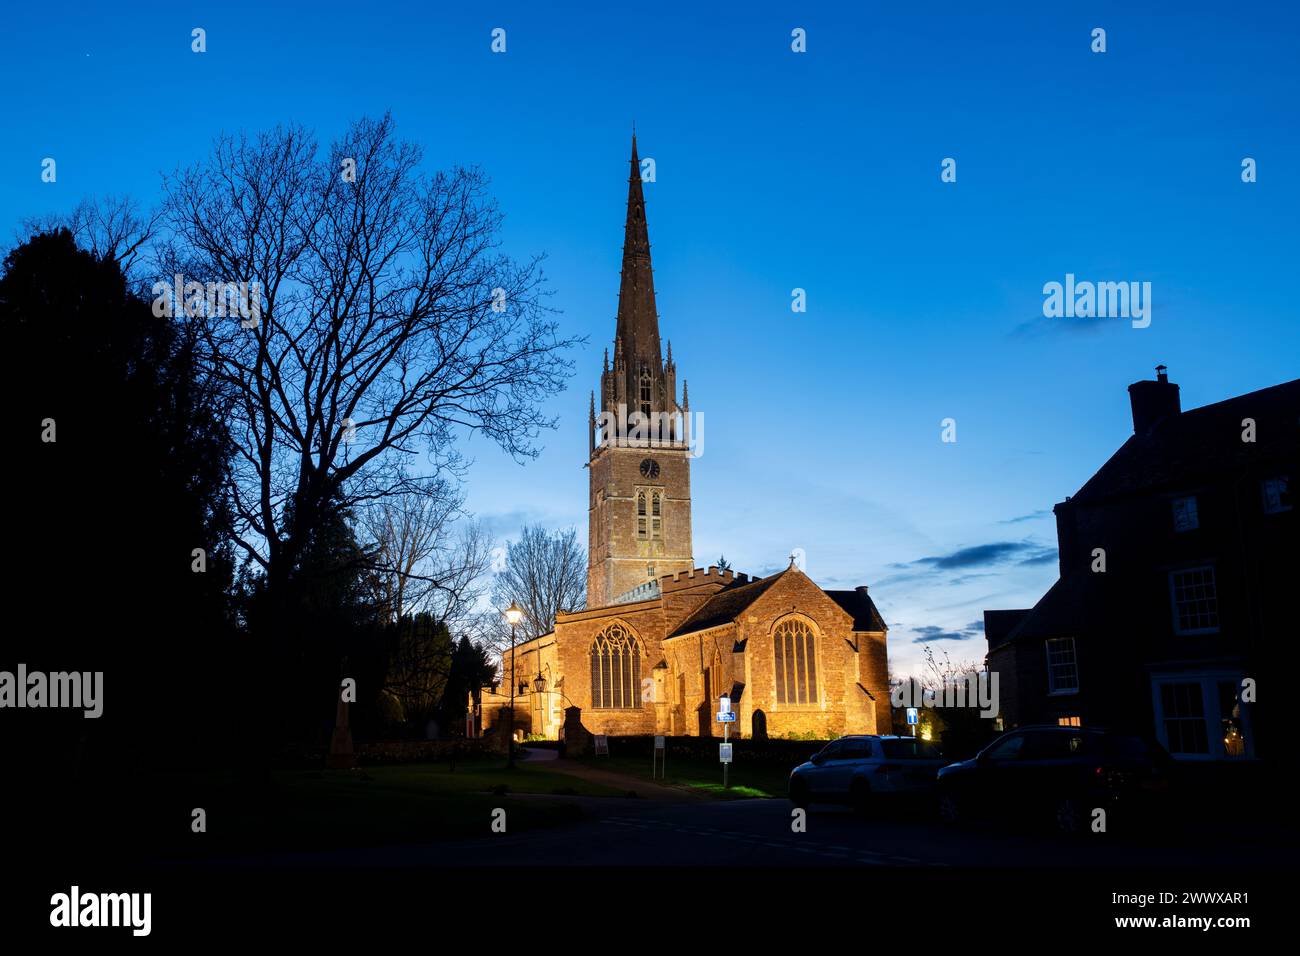 St Peter and St Paul's Church in Kings Sutton at dusk.  Kings Sutton, Northamptonshire, England Stock Photo